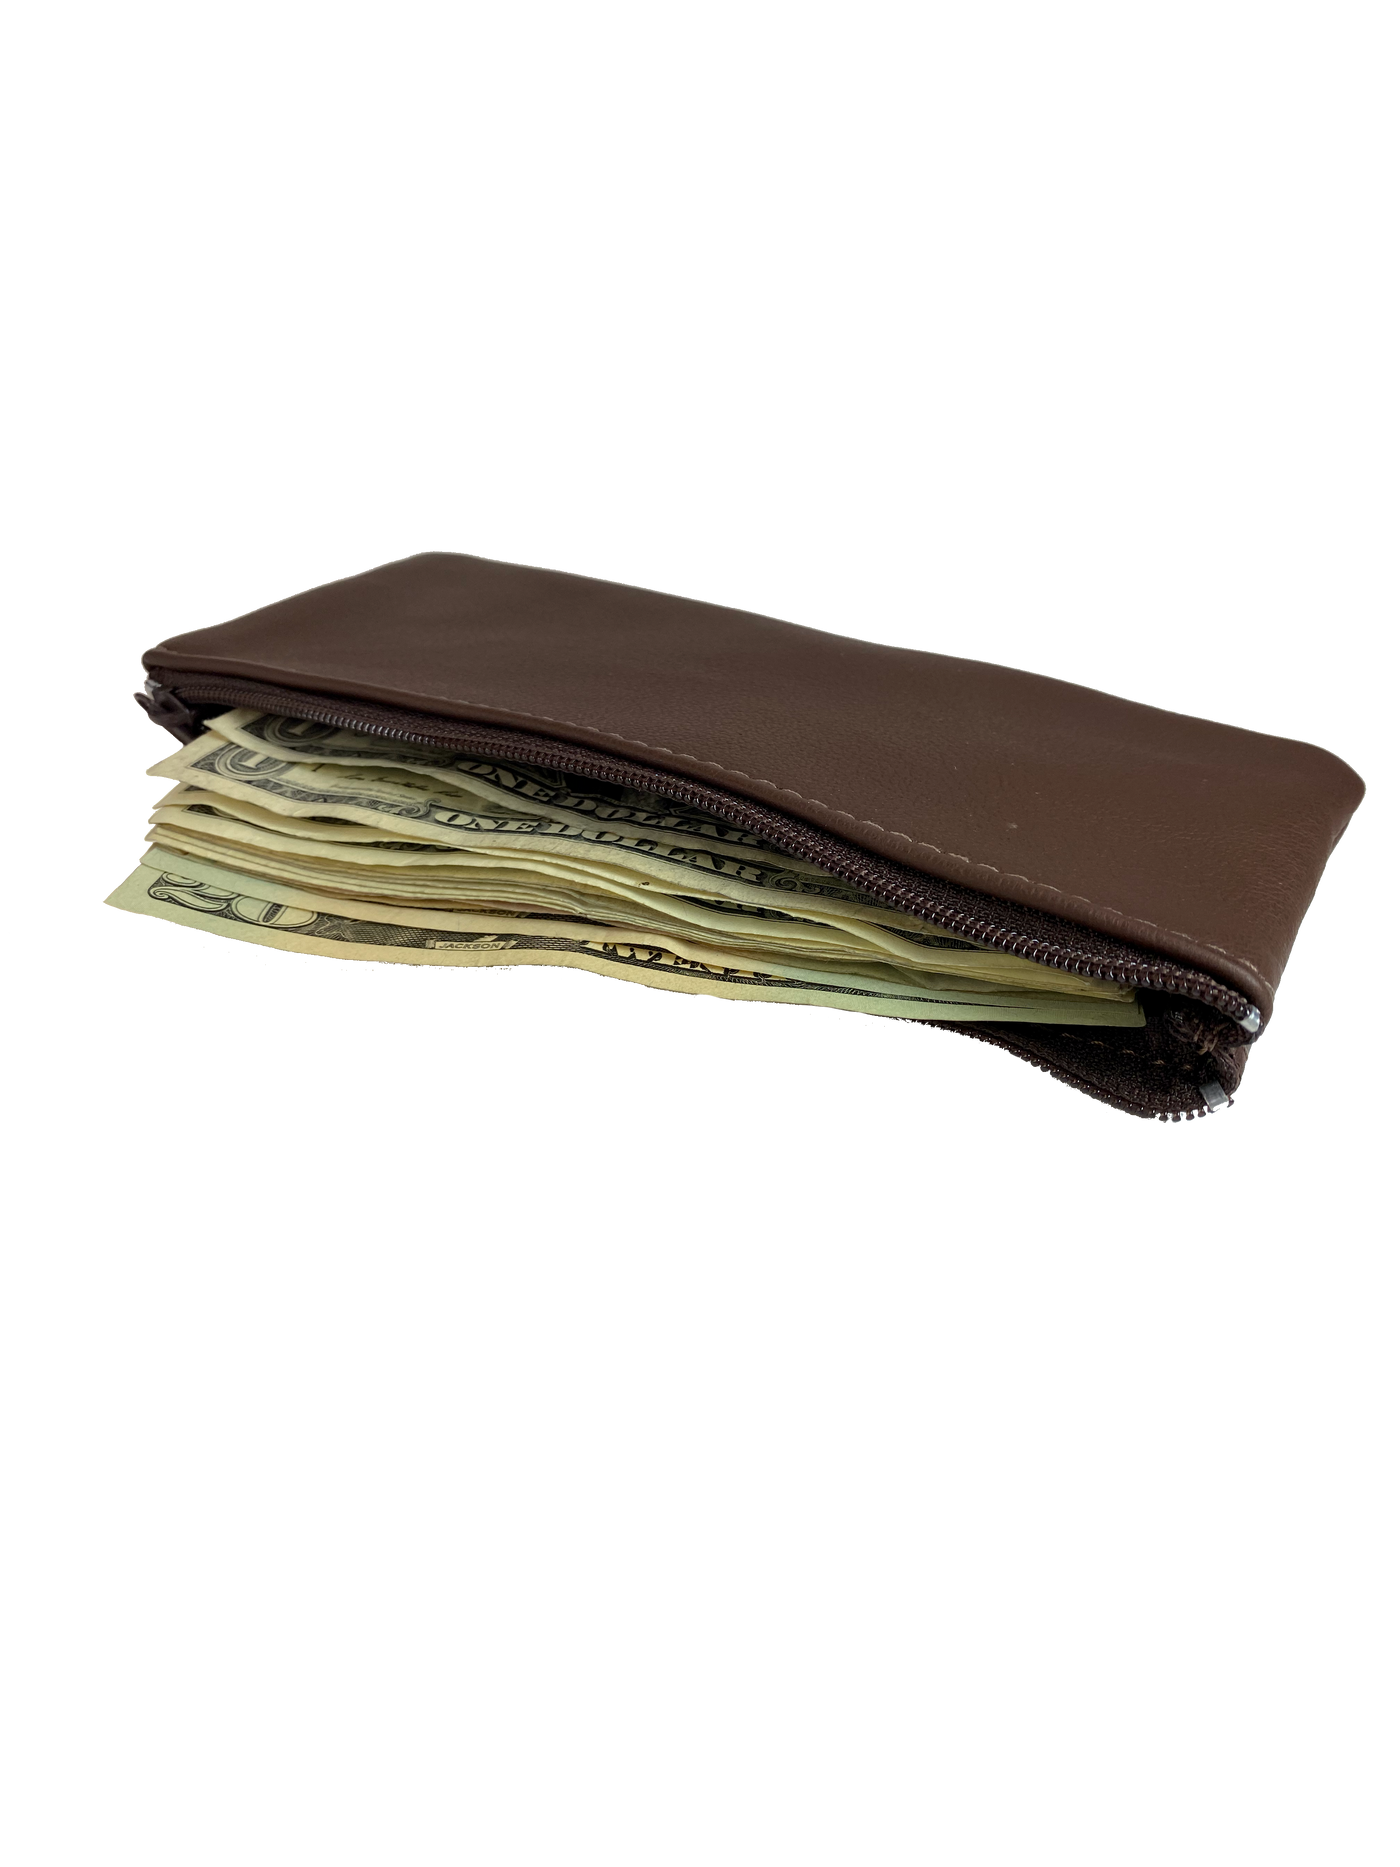 Large Leather Zippered Case. Great for carrying cash! Currently available in Brown. Sold at our shop in Smyrna, TN.